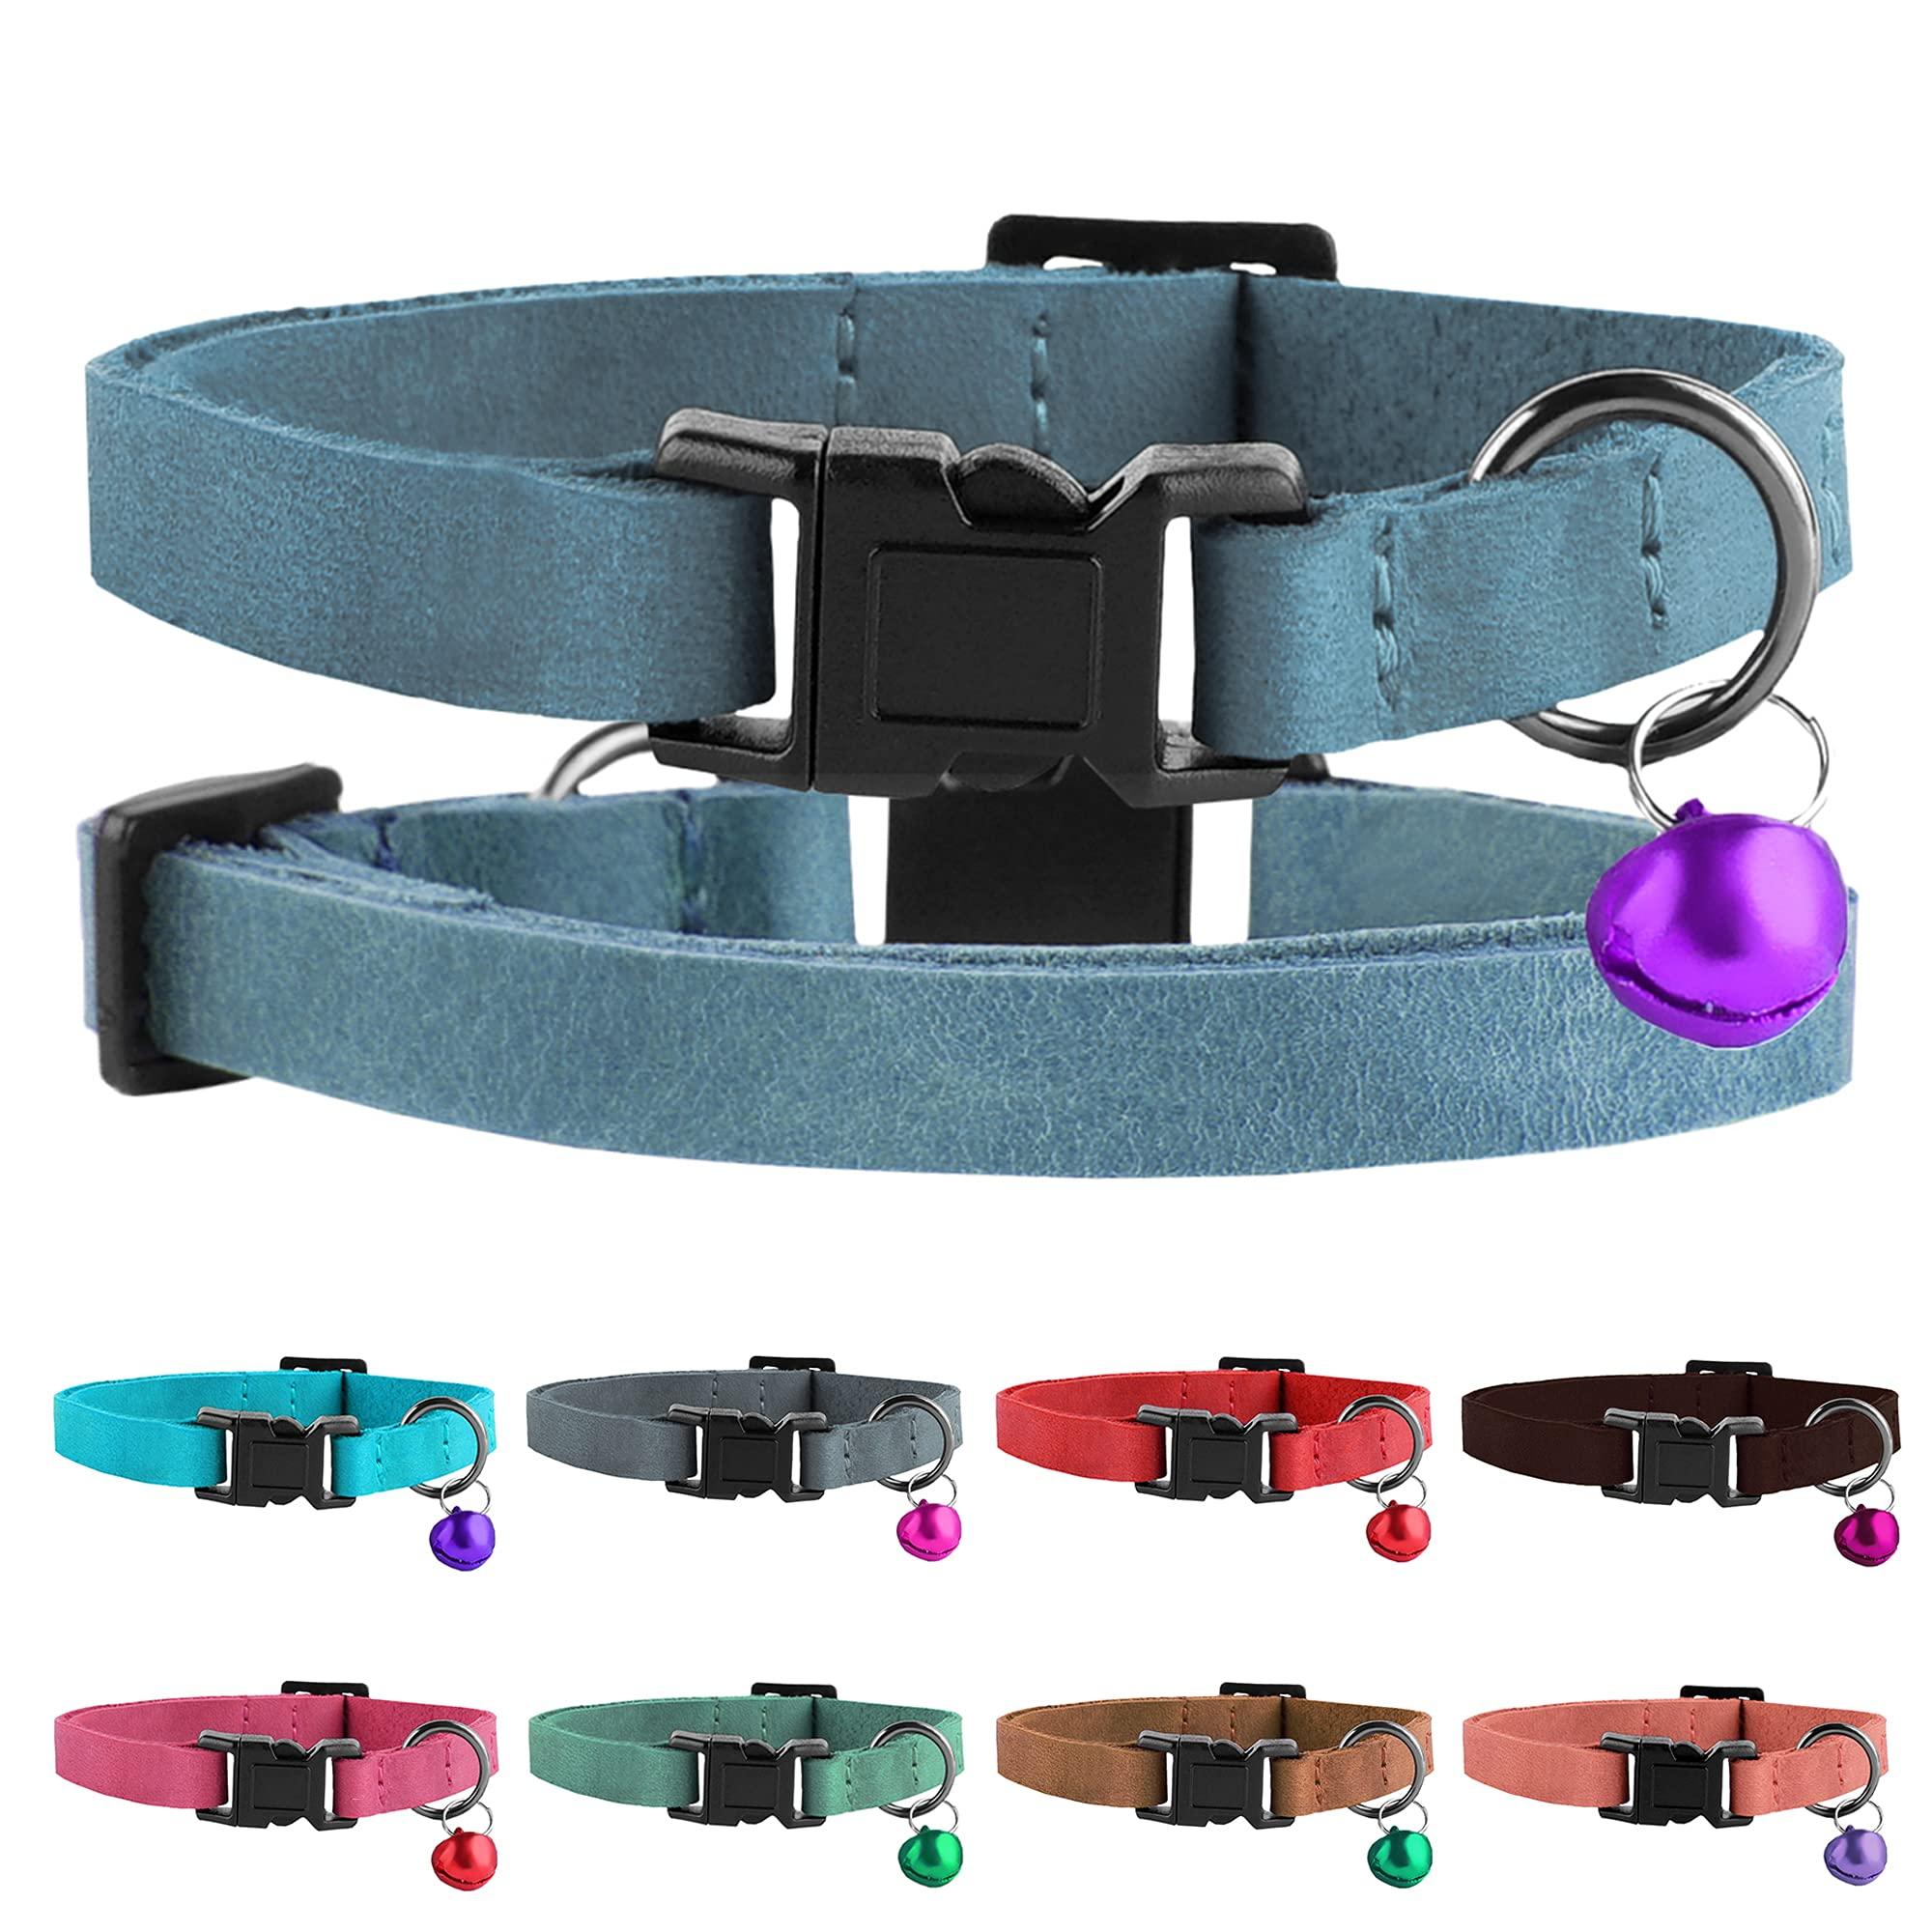 Murom Breakaway Cat Collar Leather Soft Adjustable Pet Kitten Collars with Bell Pink Brown Blue Green Red (Blue)